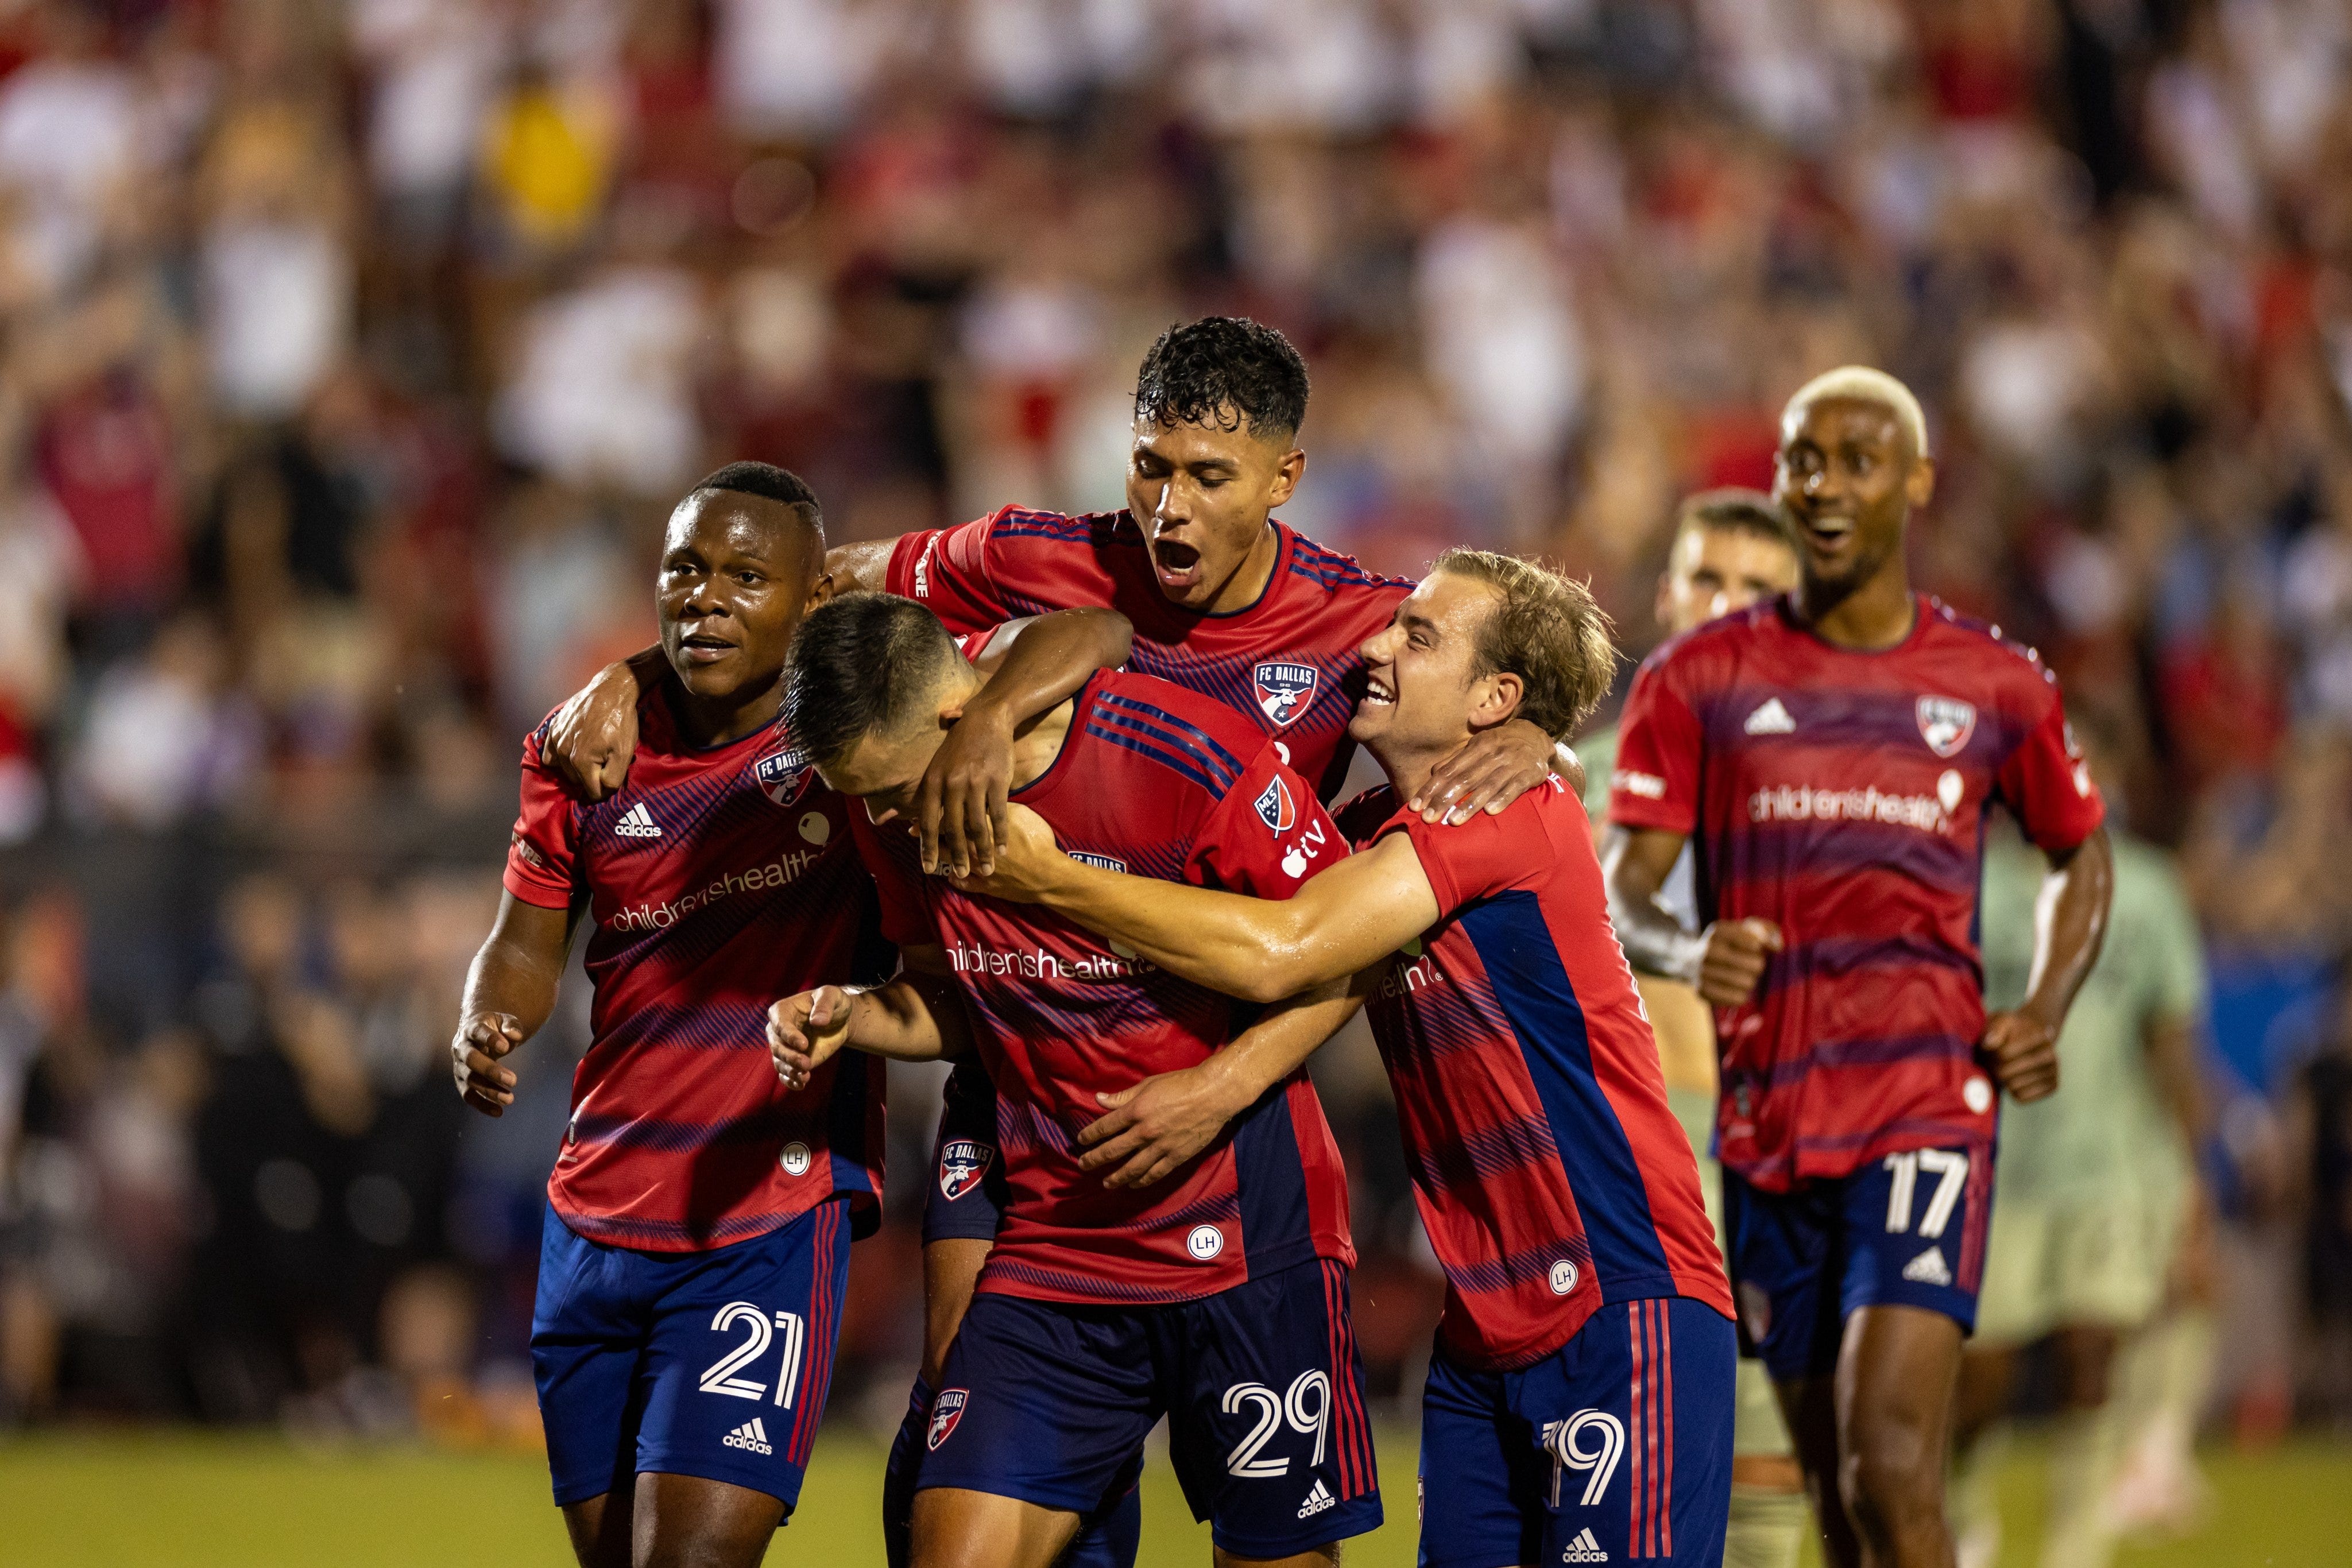 FC Dallas expect a tough 4th of July match against D.C. United